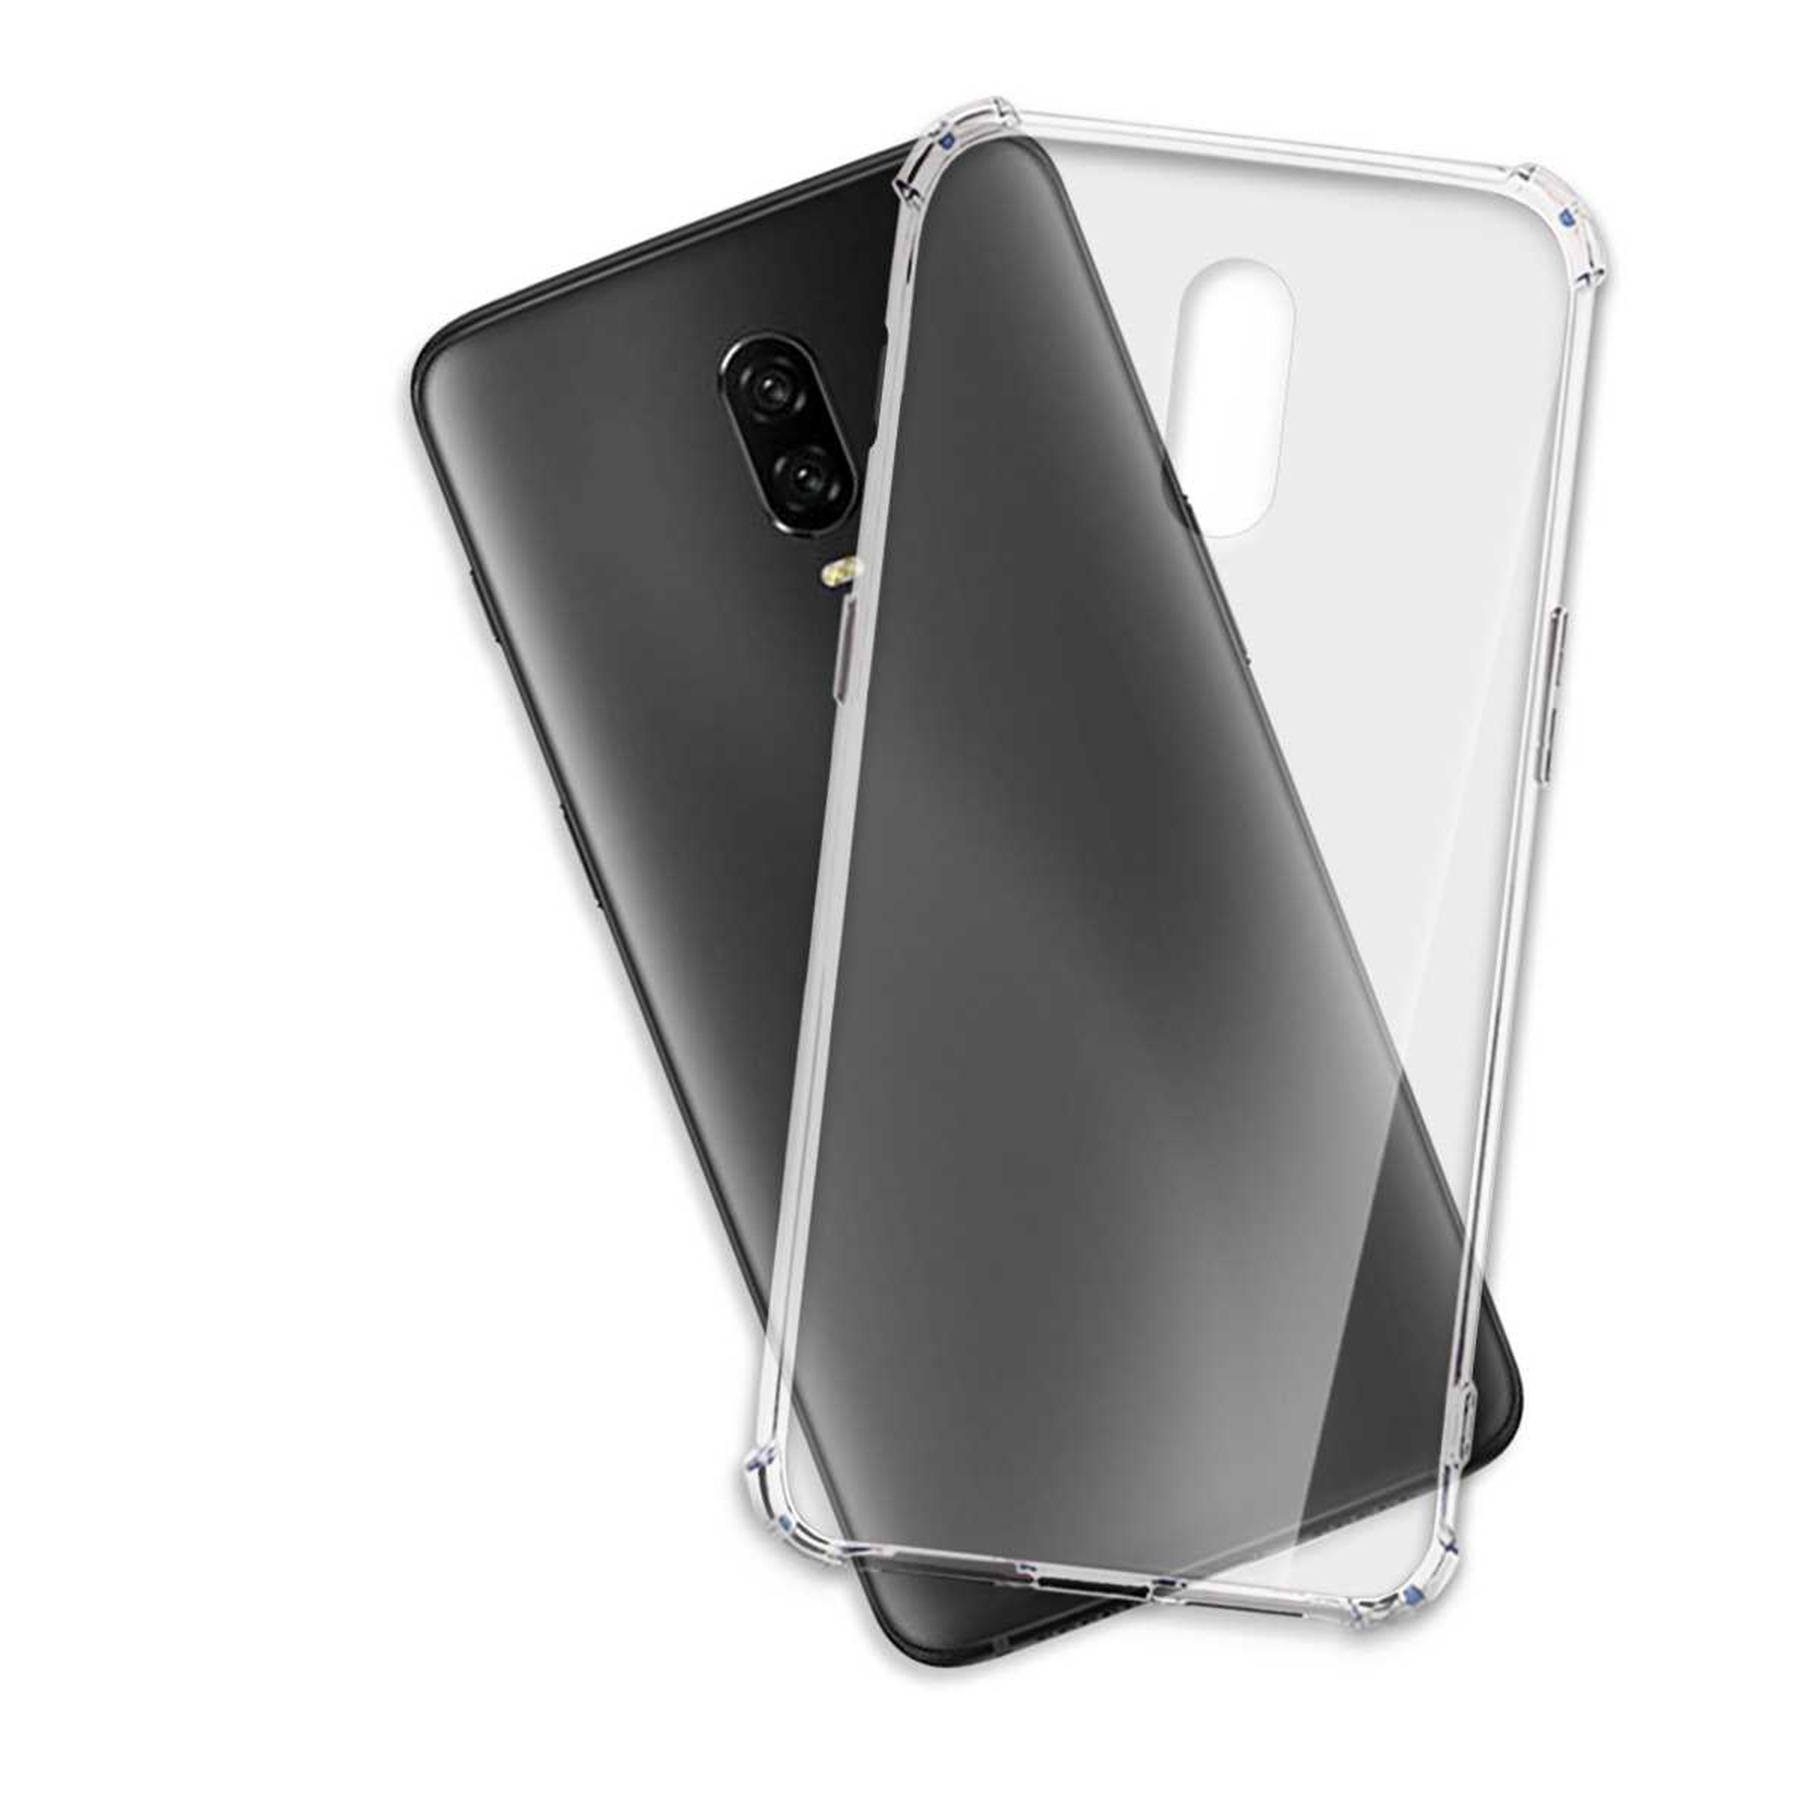 MTB MORE ENERGY Clear Armor Backcover, Transparent OnePlus, 6T, Case